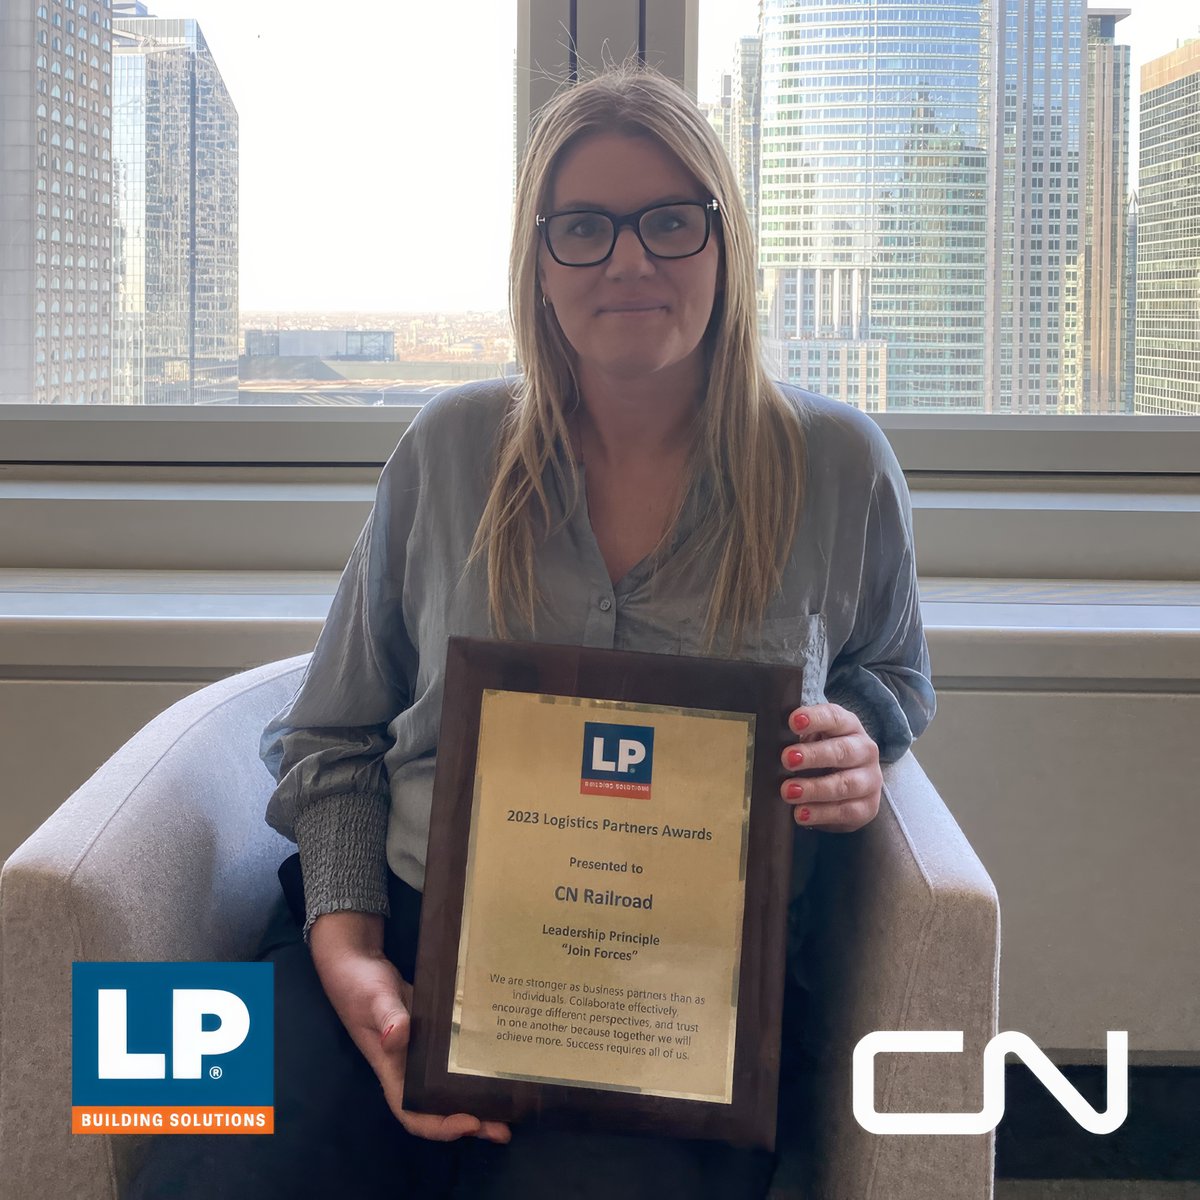 Congratulations to our Industrial Products team for winning the 2023 Logistics Partners Award Leadership Principle 'Join Forces' from our partner LP Building Solutions. Shoutout to Julie Lagacé and team for finding winning solutions and driving success!